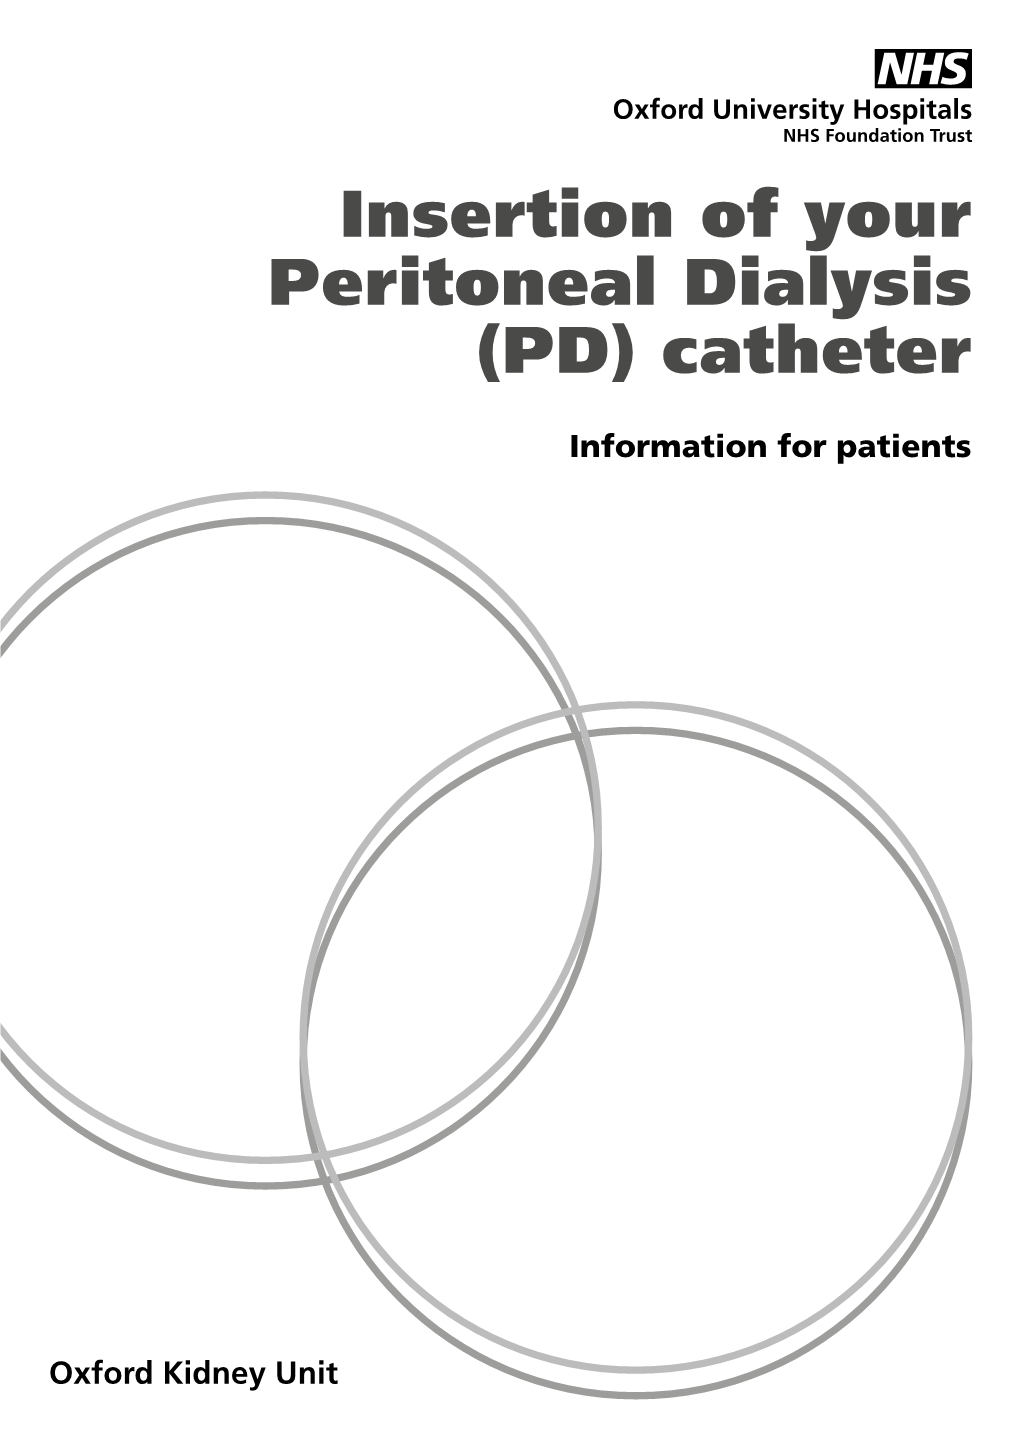 Insertion of Your Peritoneal Dialysis (PD) Catheter